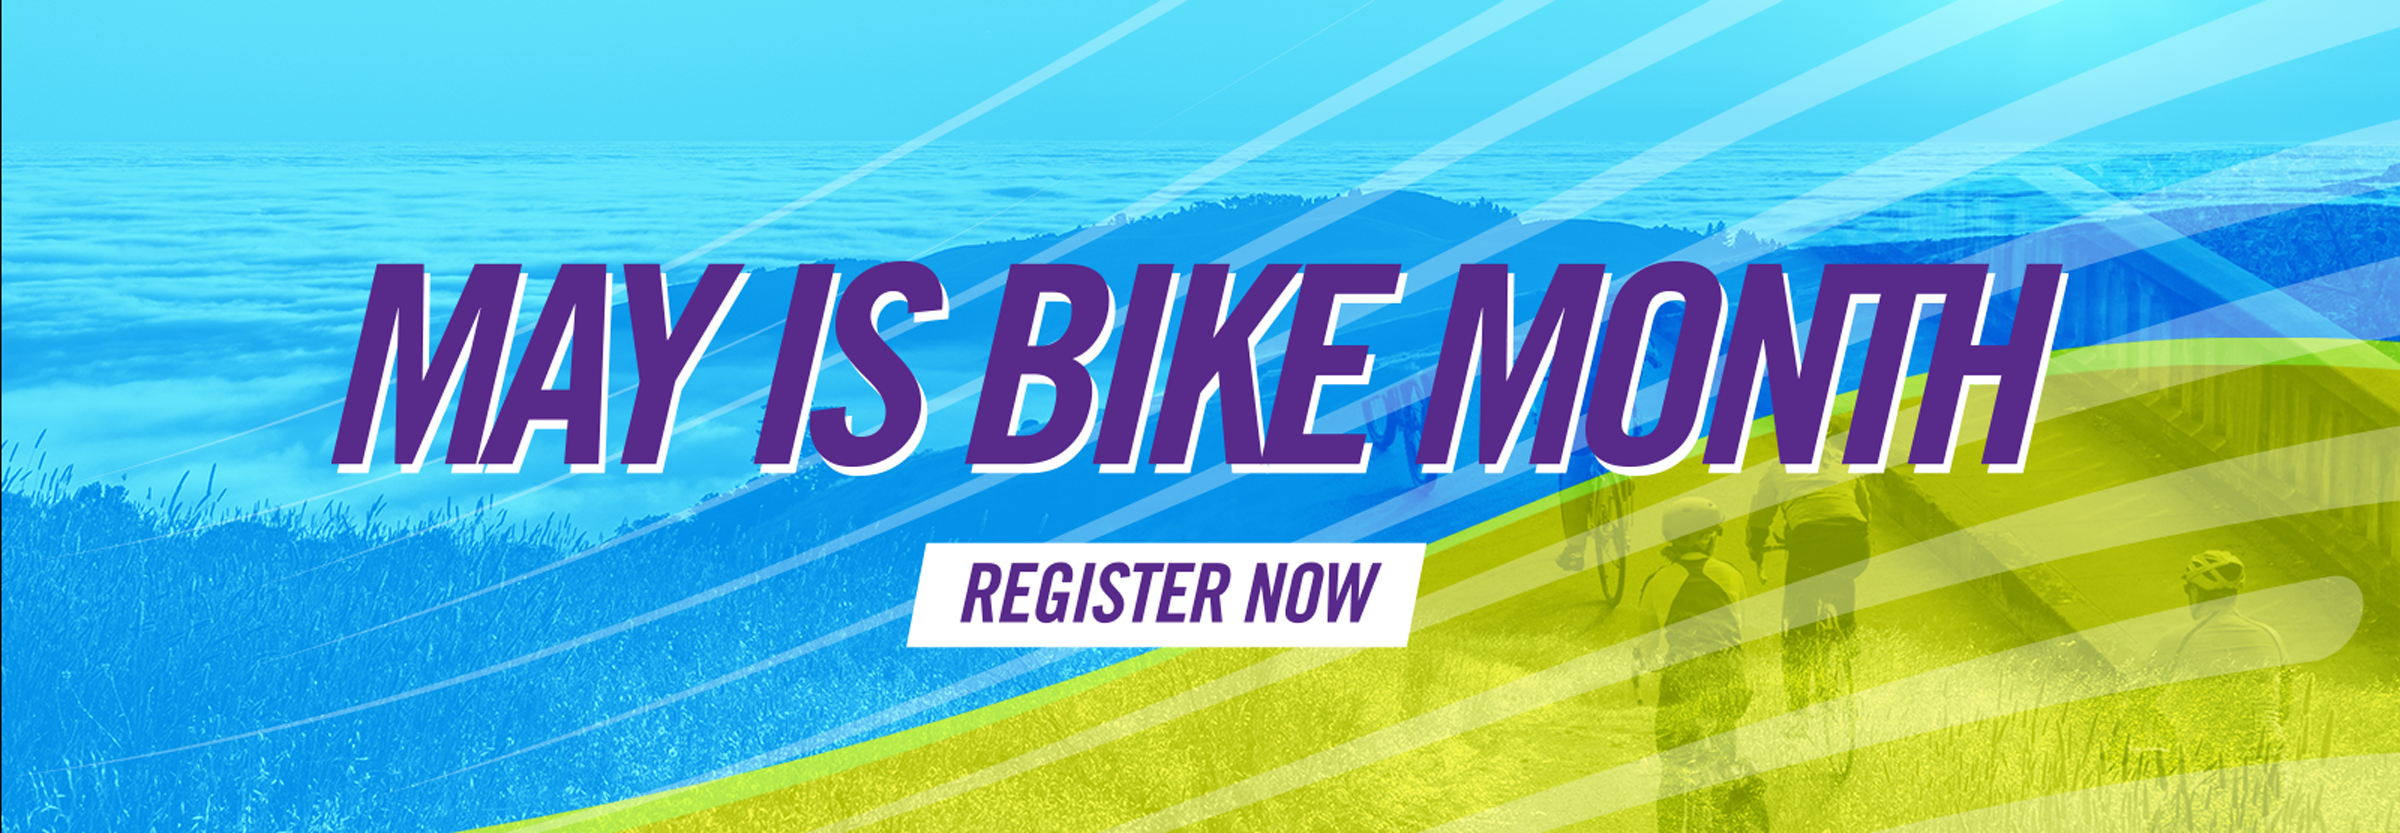 May is Bike Month - Register Now